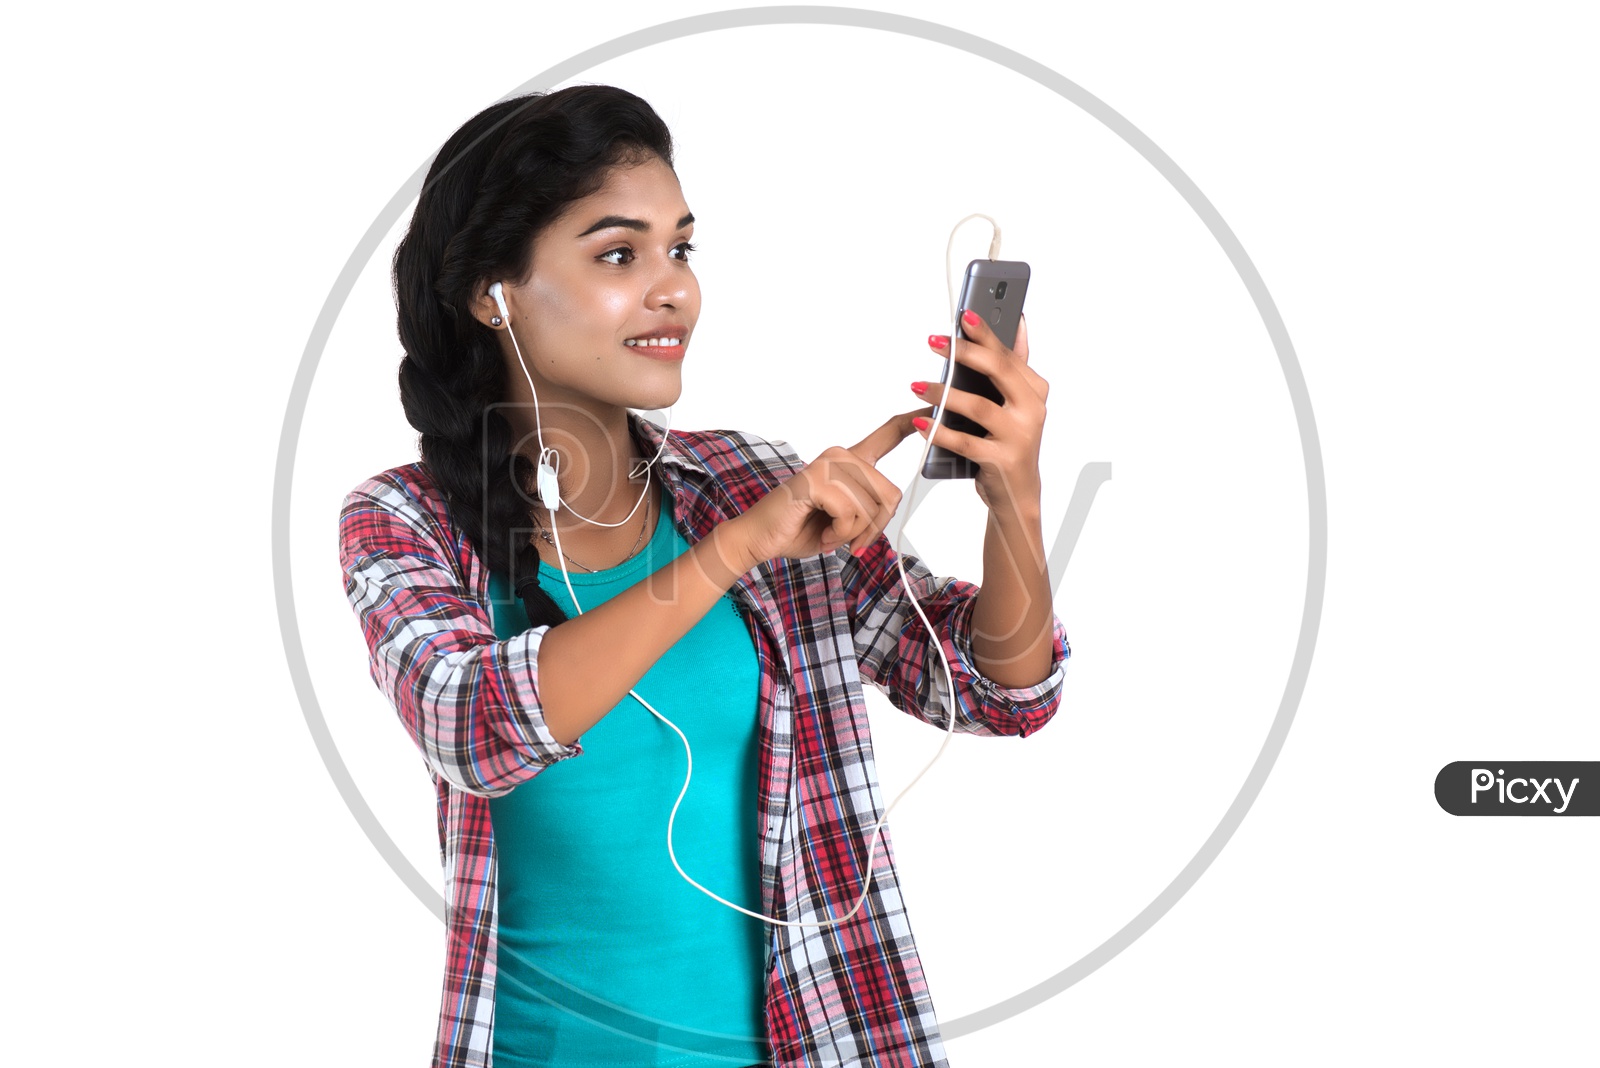 A Pretty Indian Young Girl Making Video Call on her Smart Phone With an Expression on an isolated White Background